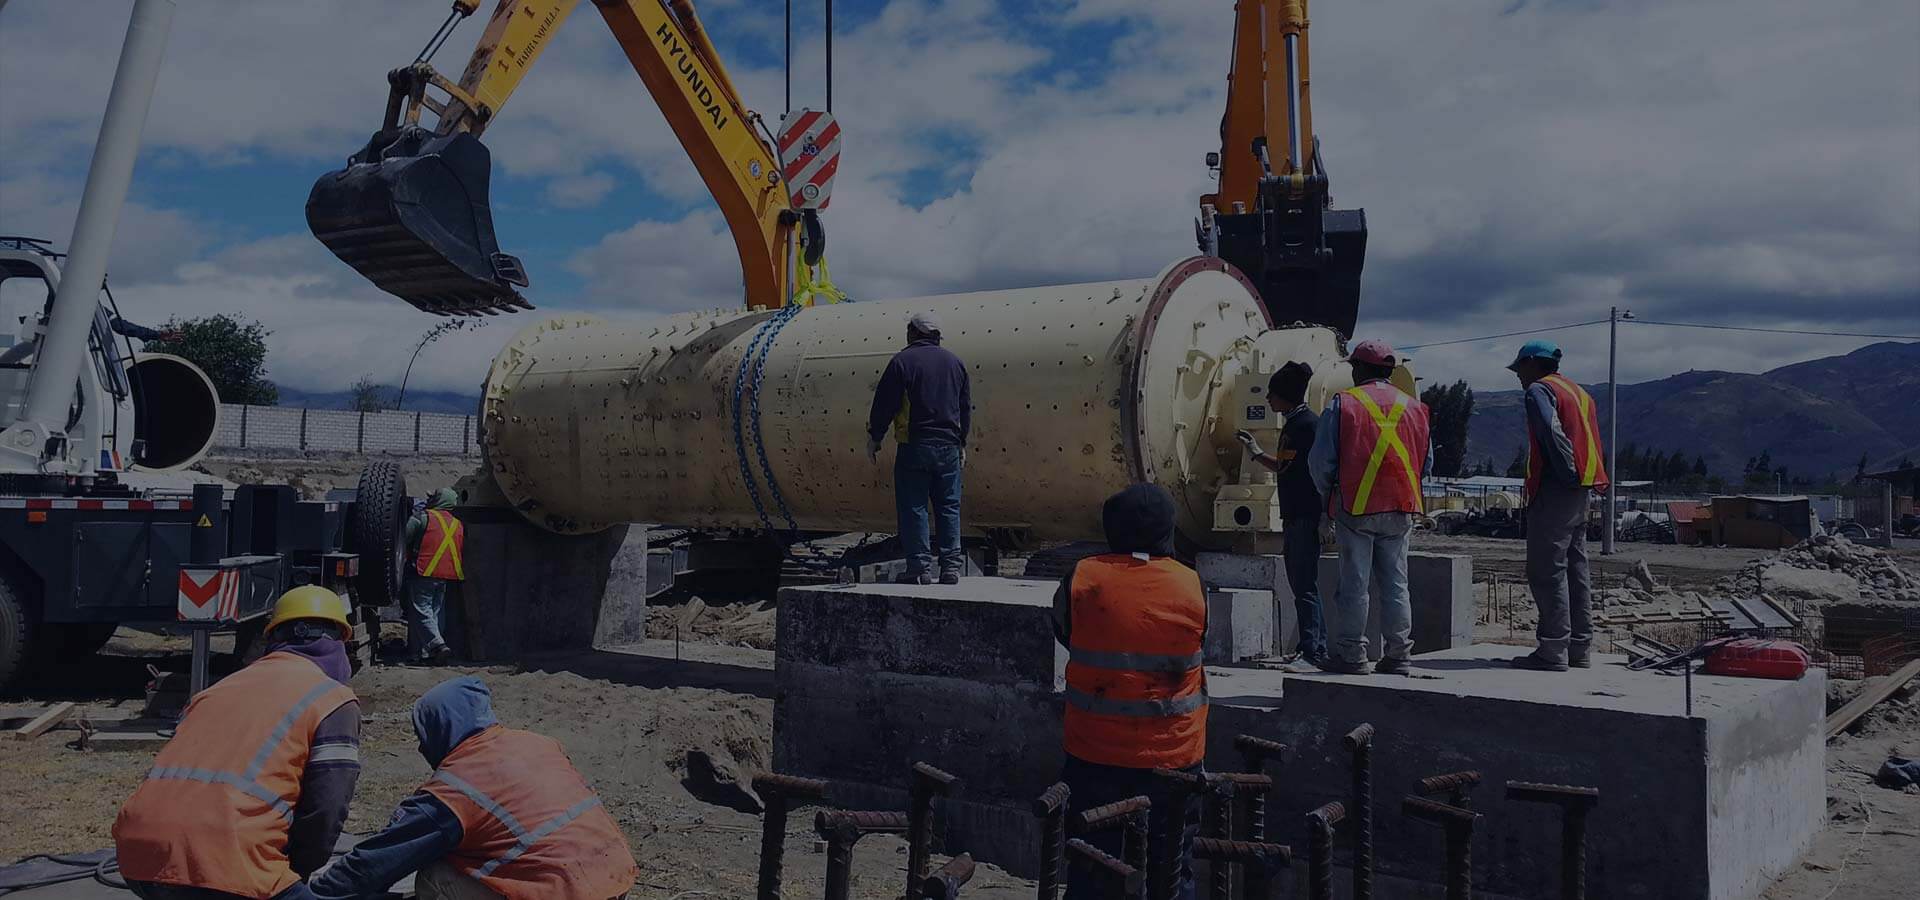 Ball mill images